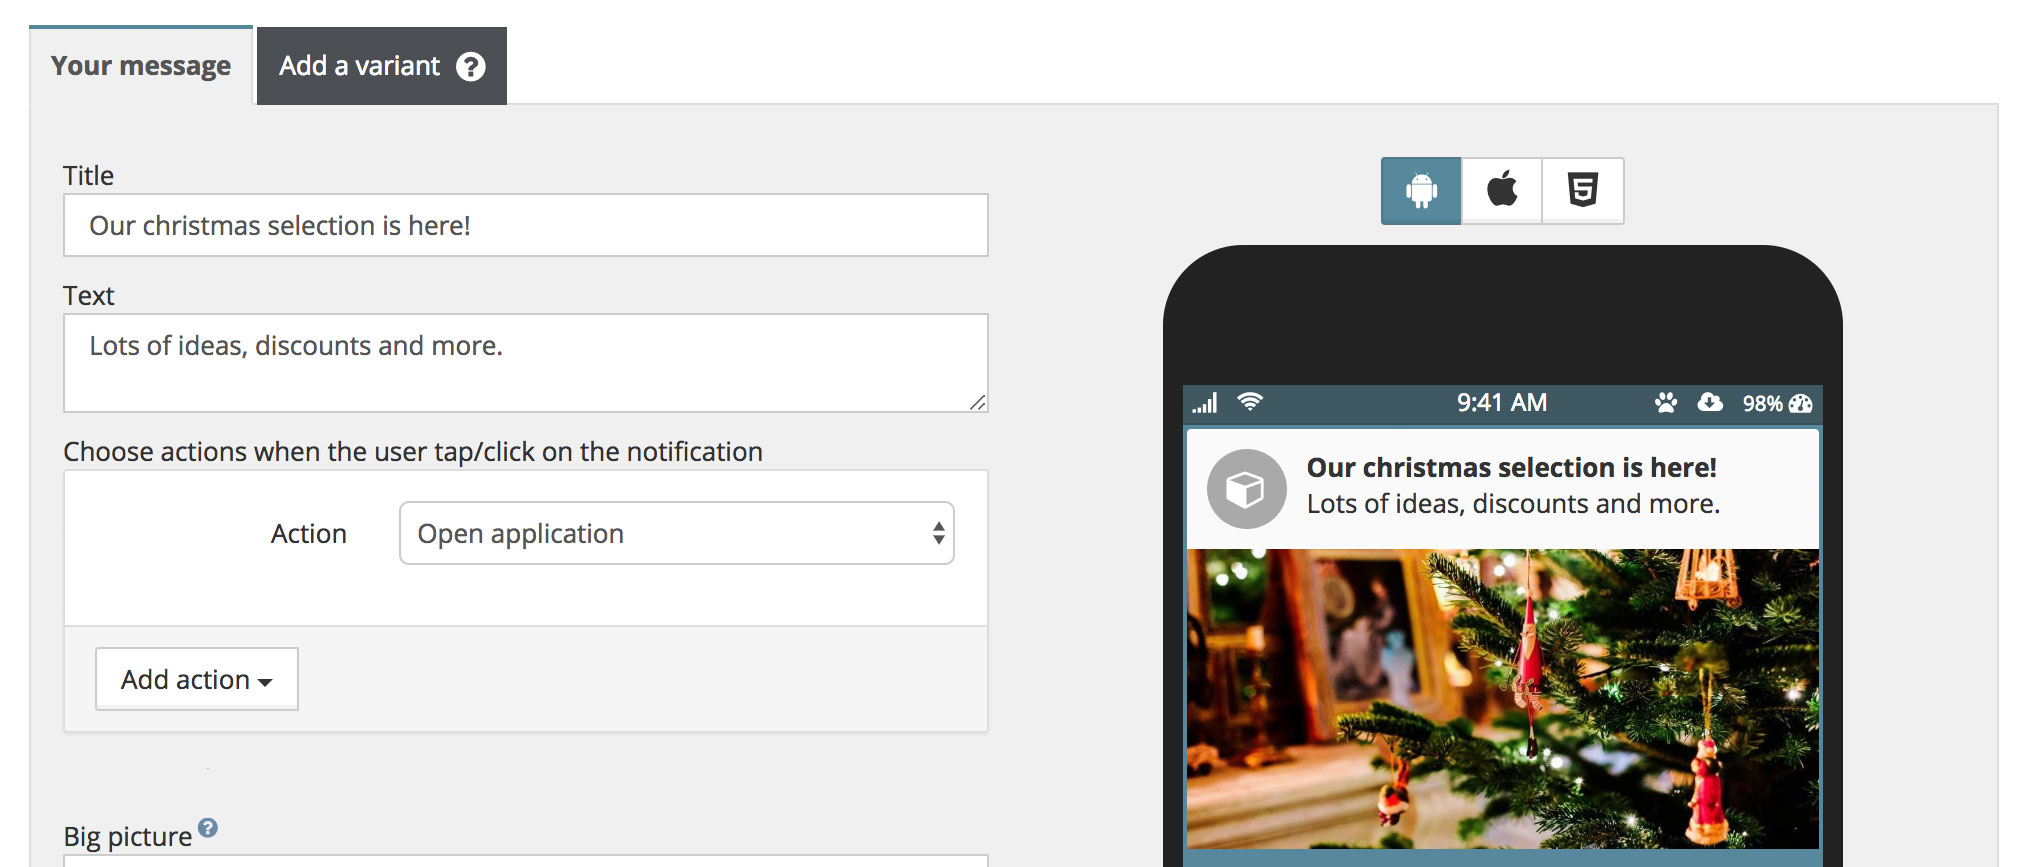 How to Implement Push Notifications for more Customer Engagement? Digital Marketing 